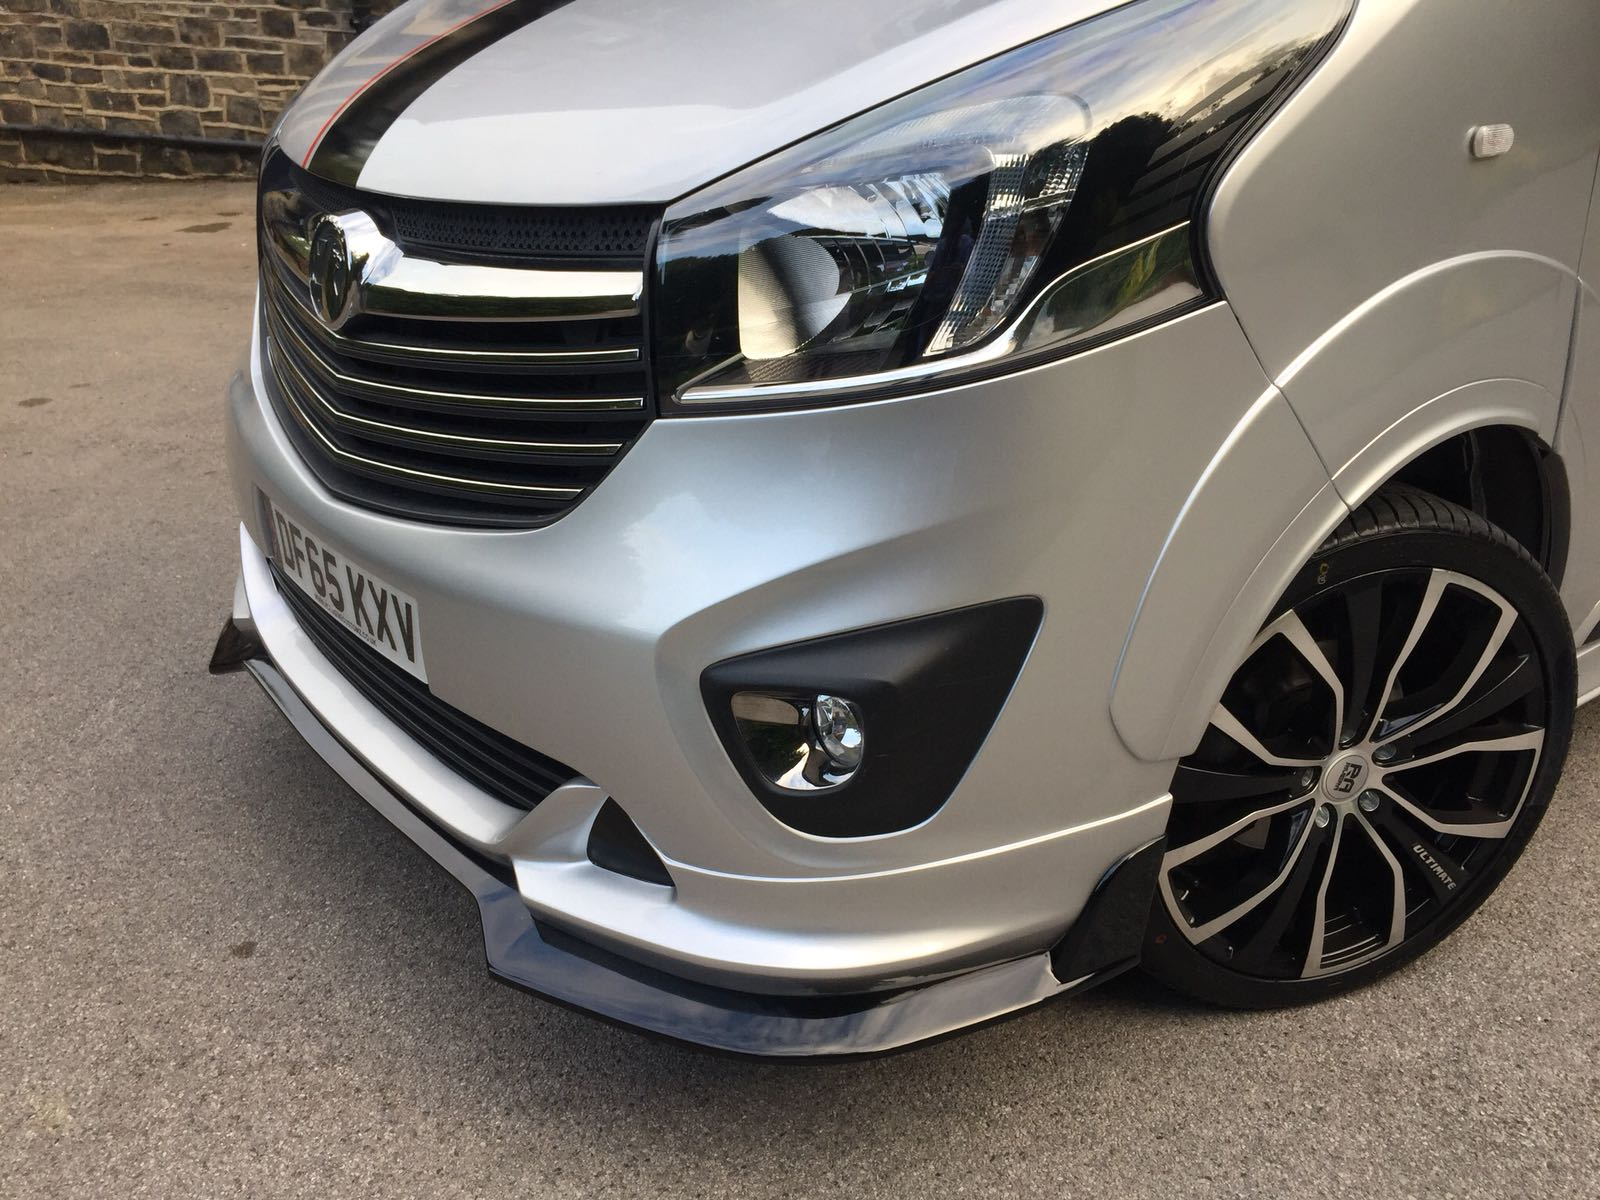 A photo of the Vauxhall Vivaro Front Bumper add on